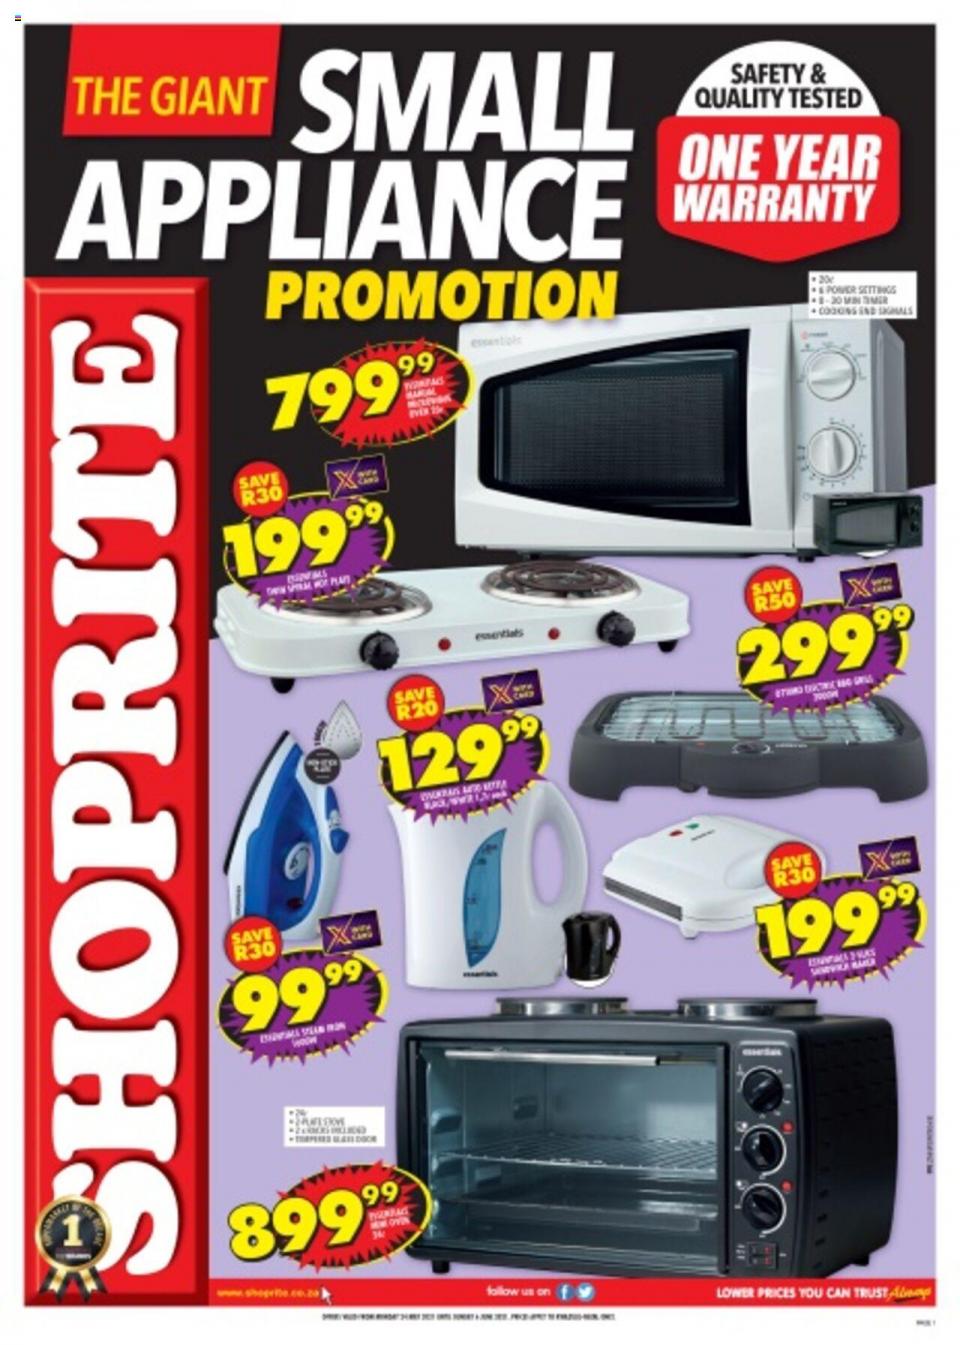 Shoprite Small Appliance Promotion 24 May 2021 Shoprite Specials